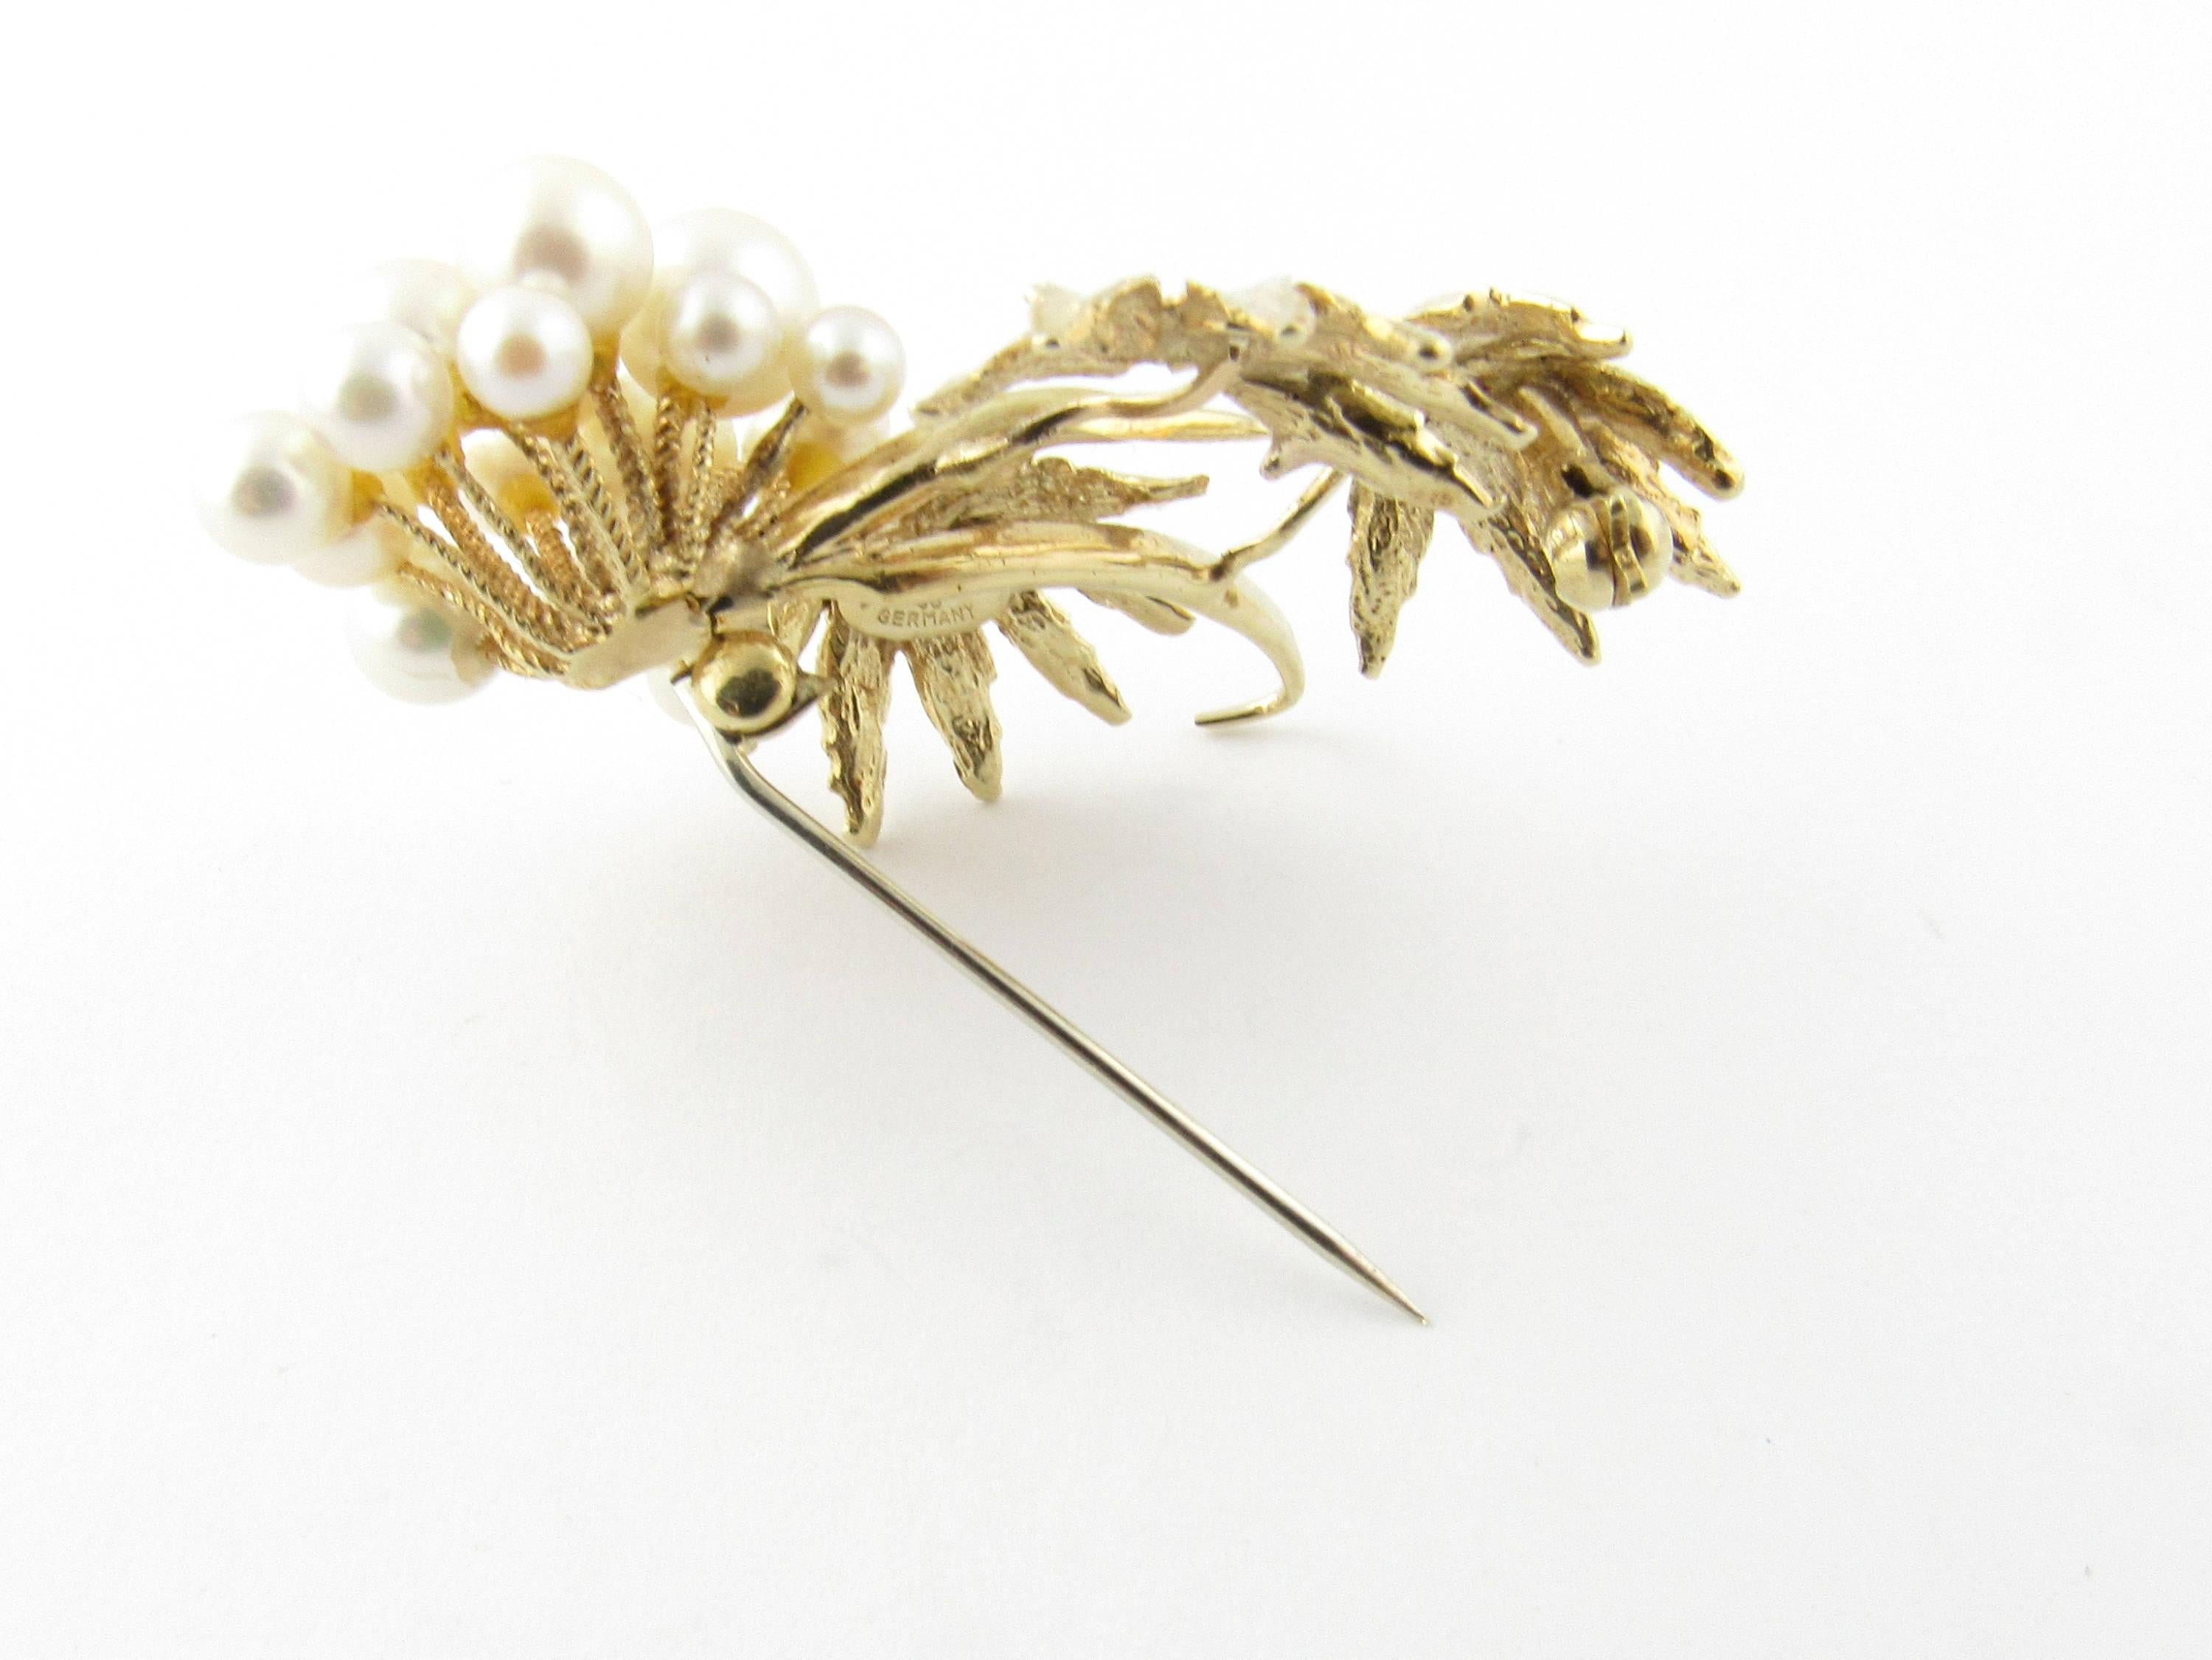 Vintage 14 Karat Yellow Gold and Pearl Grosse Germany Brooch/Pin-

This lovely floral brooch features 20 luminous pearls set in exquisitely detailed 14K yellow gold.

Size: 38 mm x 20 mm

Weight: 5.7 dwt. / 9.0 gr.

Hallmark: Grosse 1968